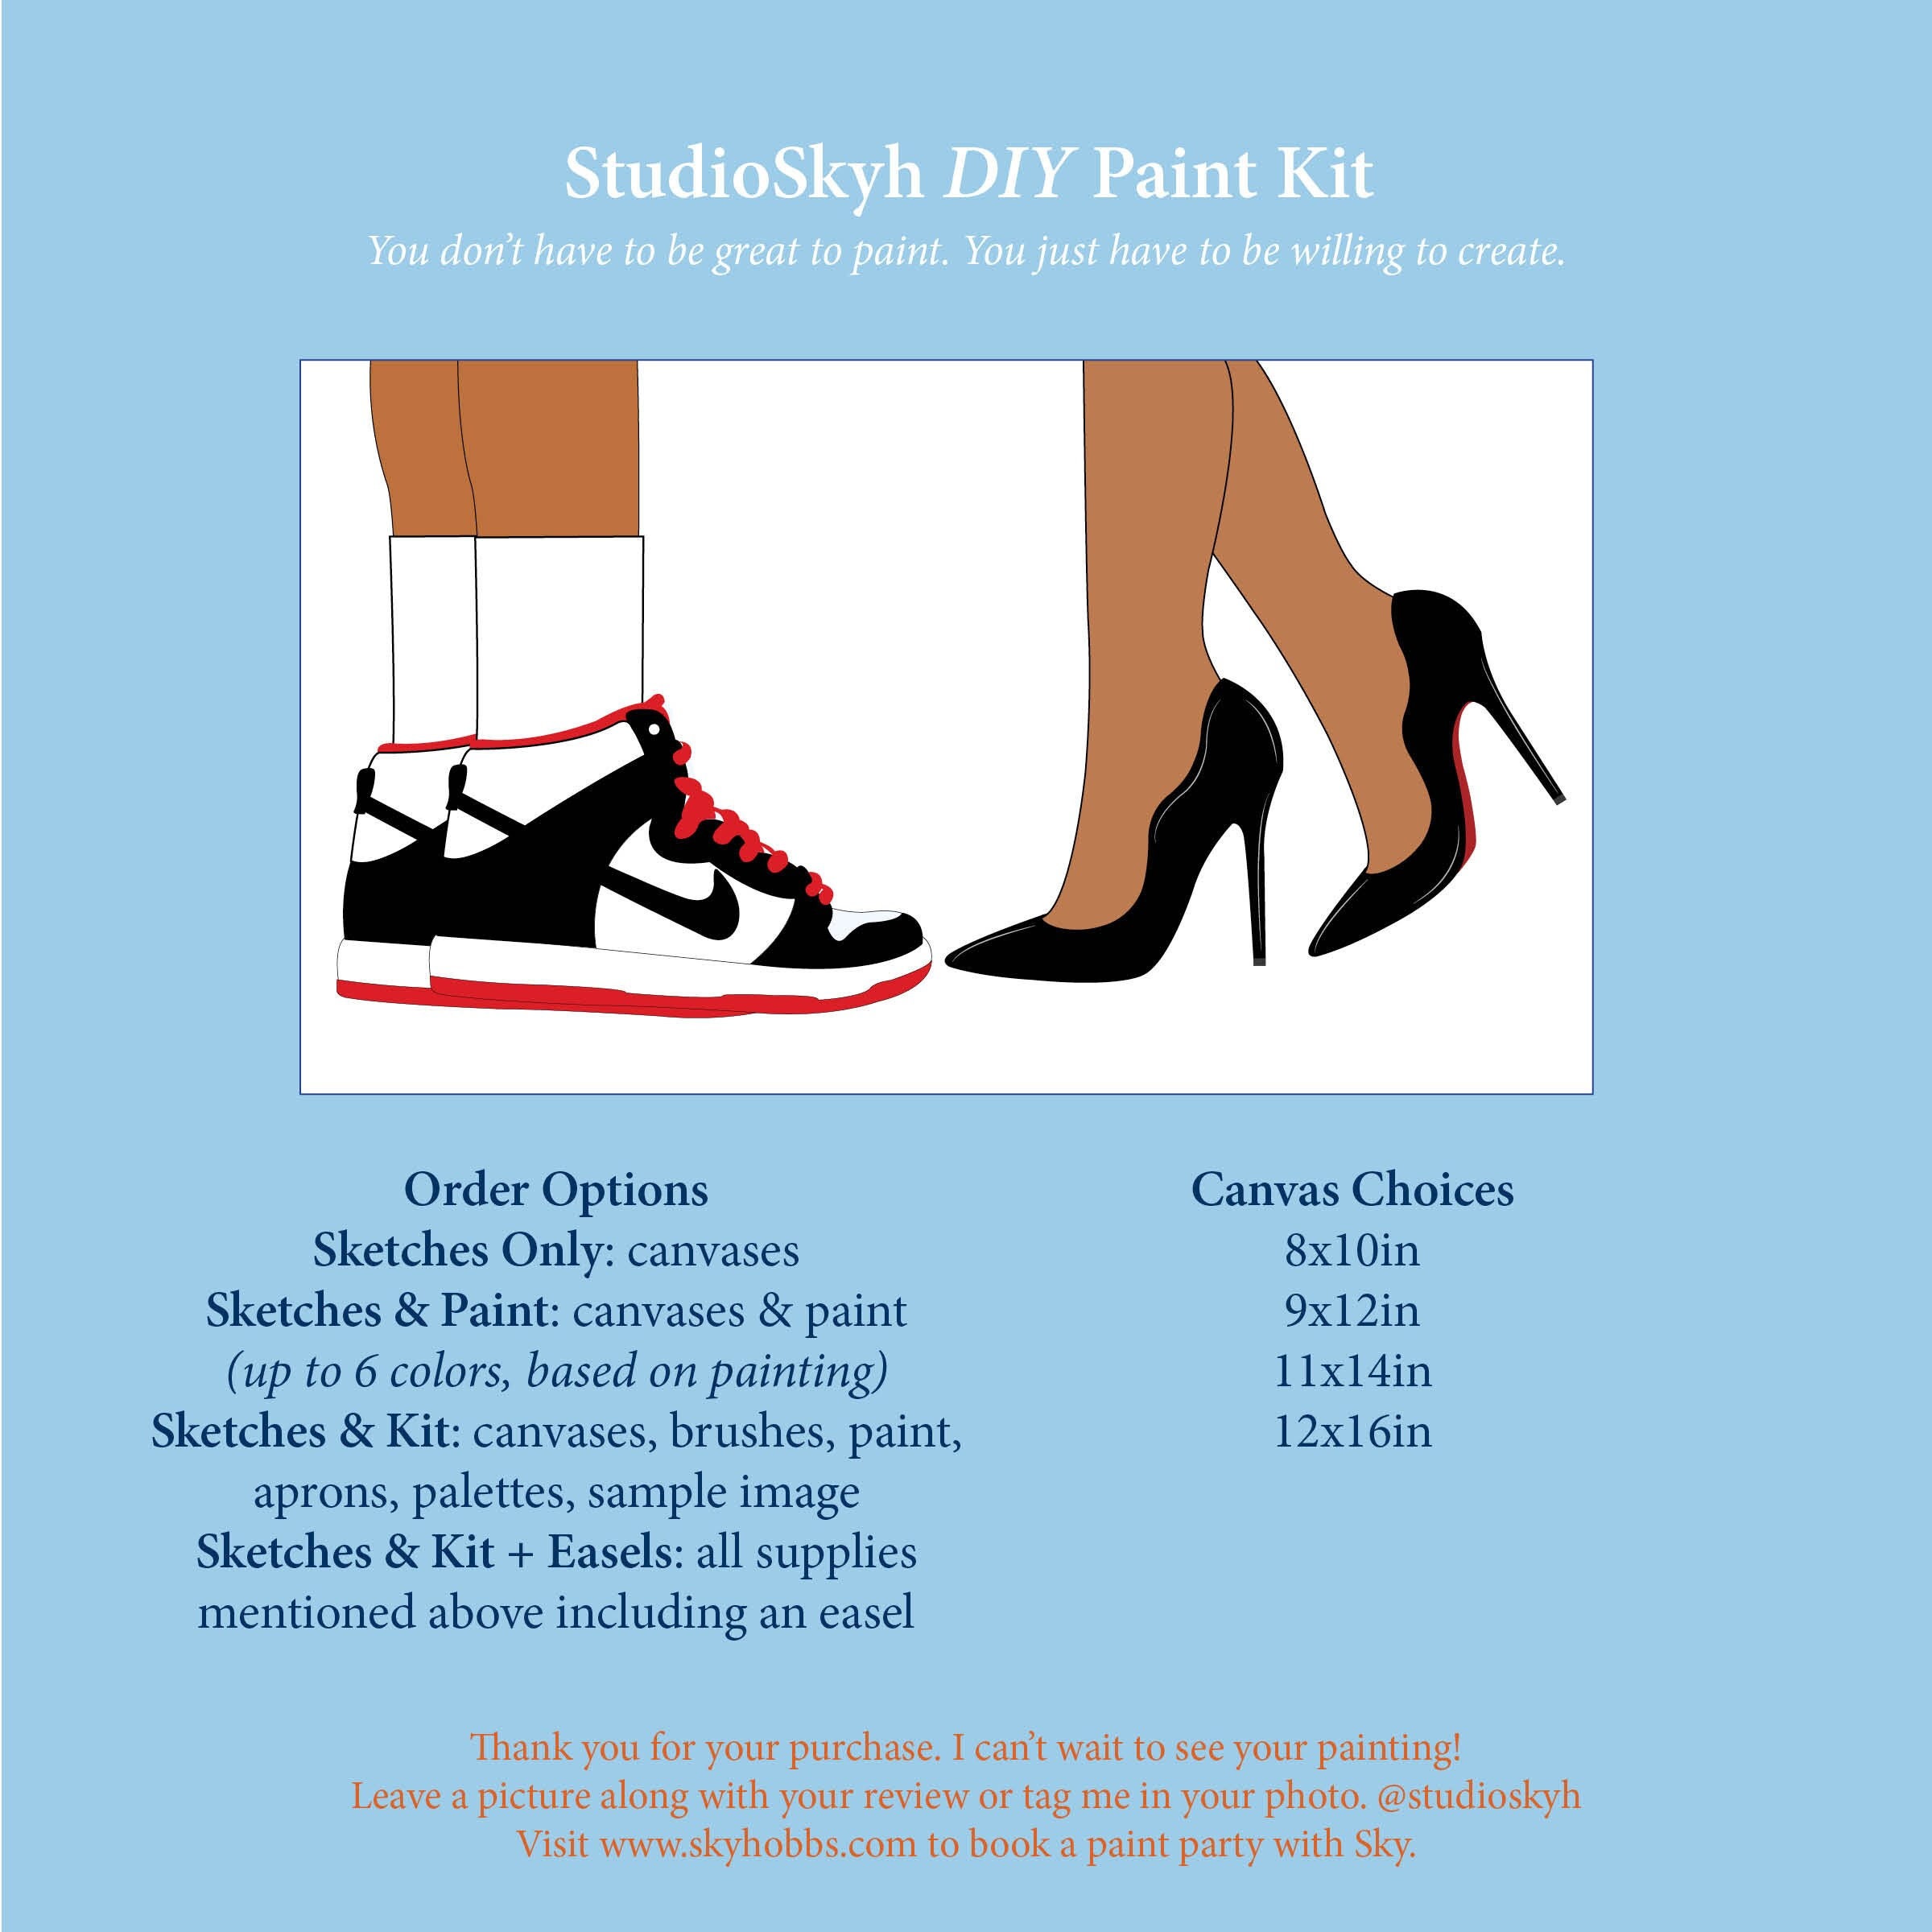 Heels/sneakers and Crown/couples/date Night Paint Kit,valentines